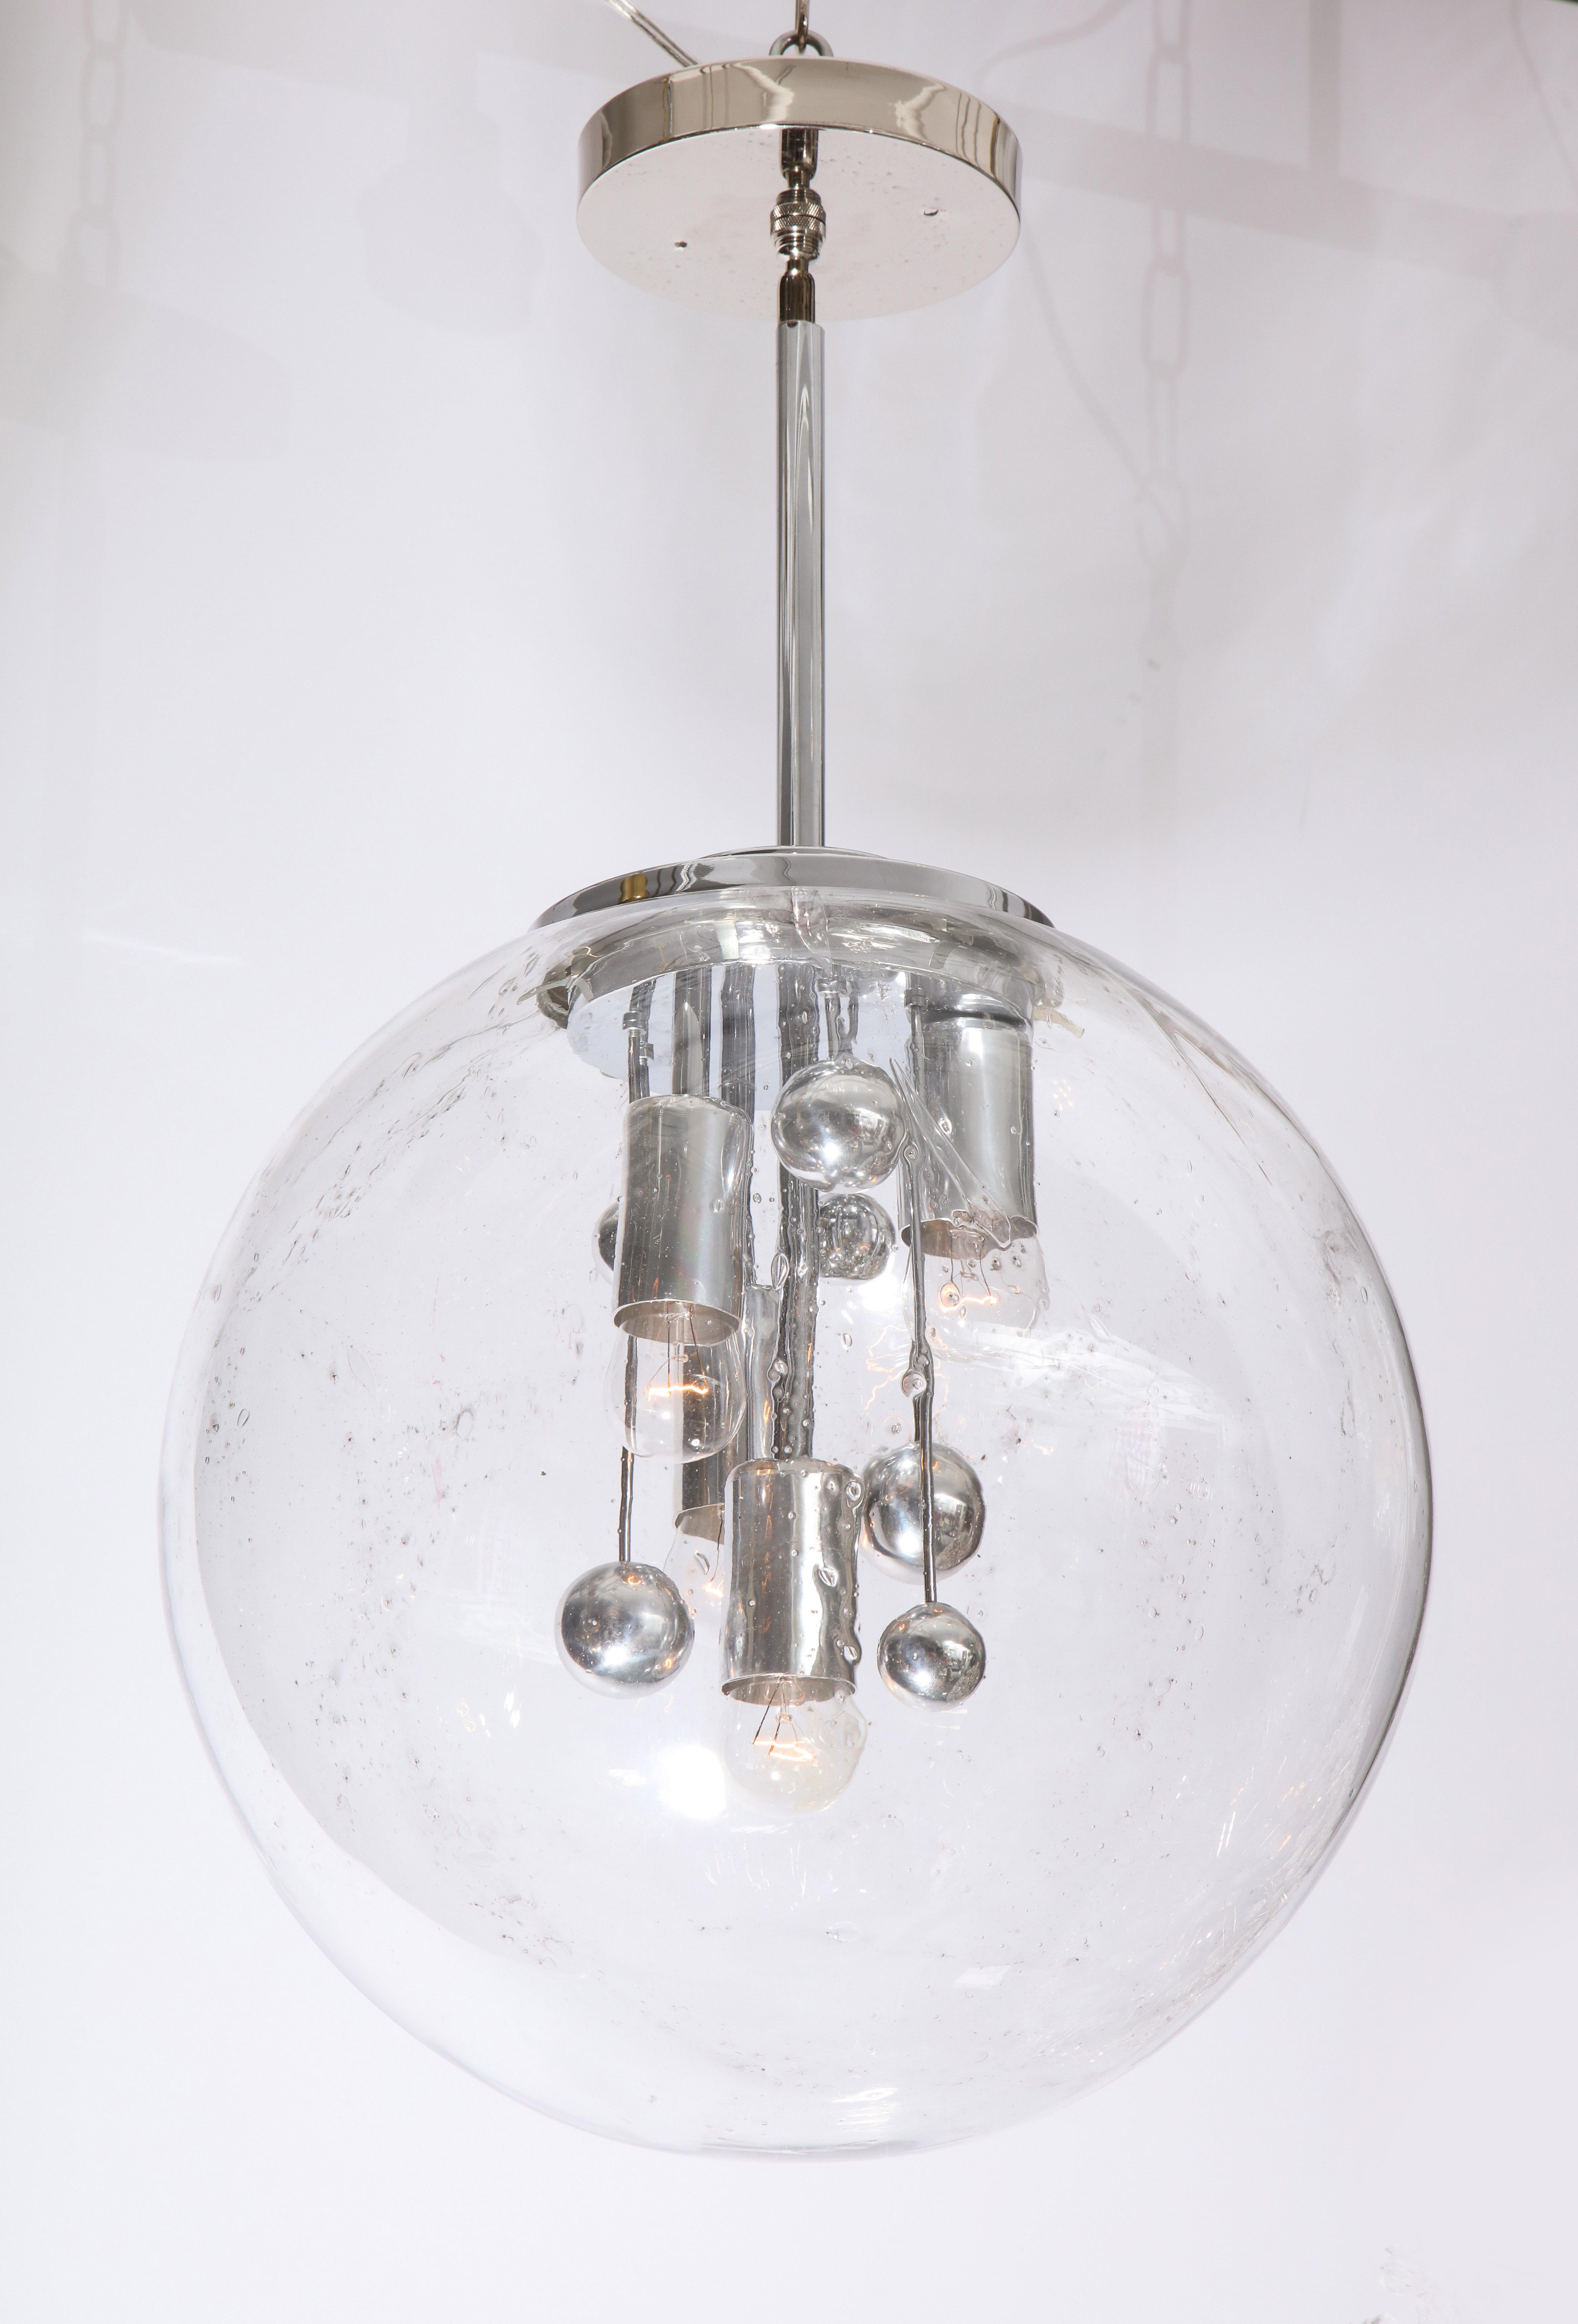 Large Murano glass globe sputnik pendant light by Doria lighting company.
The large glass globe has subtle grey veining and it has been newly rewired for the US
with four standard light sockets.
The overall height is 28